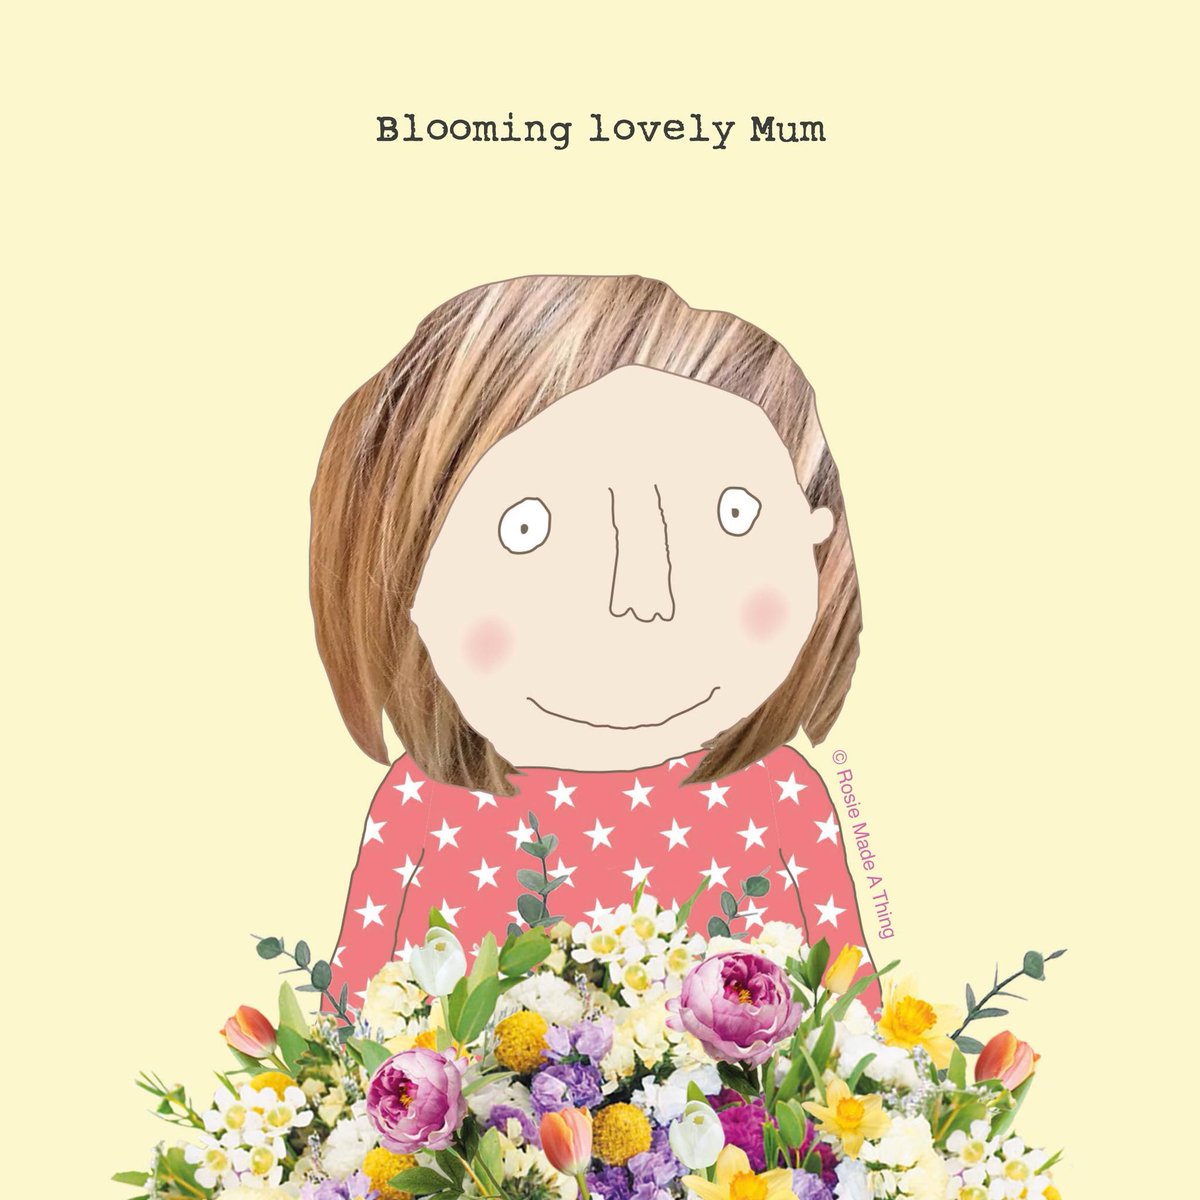 For blooming lovely mums everywhere! 💐 Mother's Day 10th March Cards and gifts on our website 👉🏼 rosiemadeathing.co.uk/product-catego… #MothersDay #rosiemadeathing